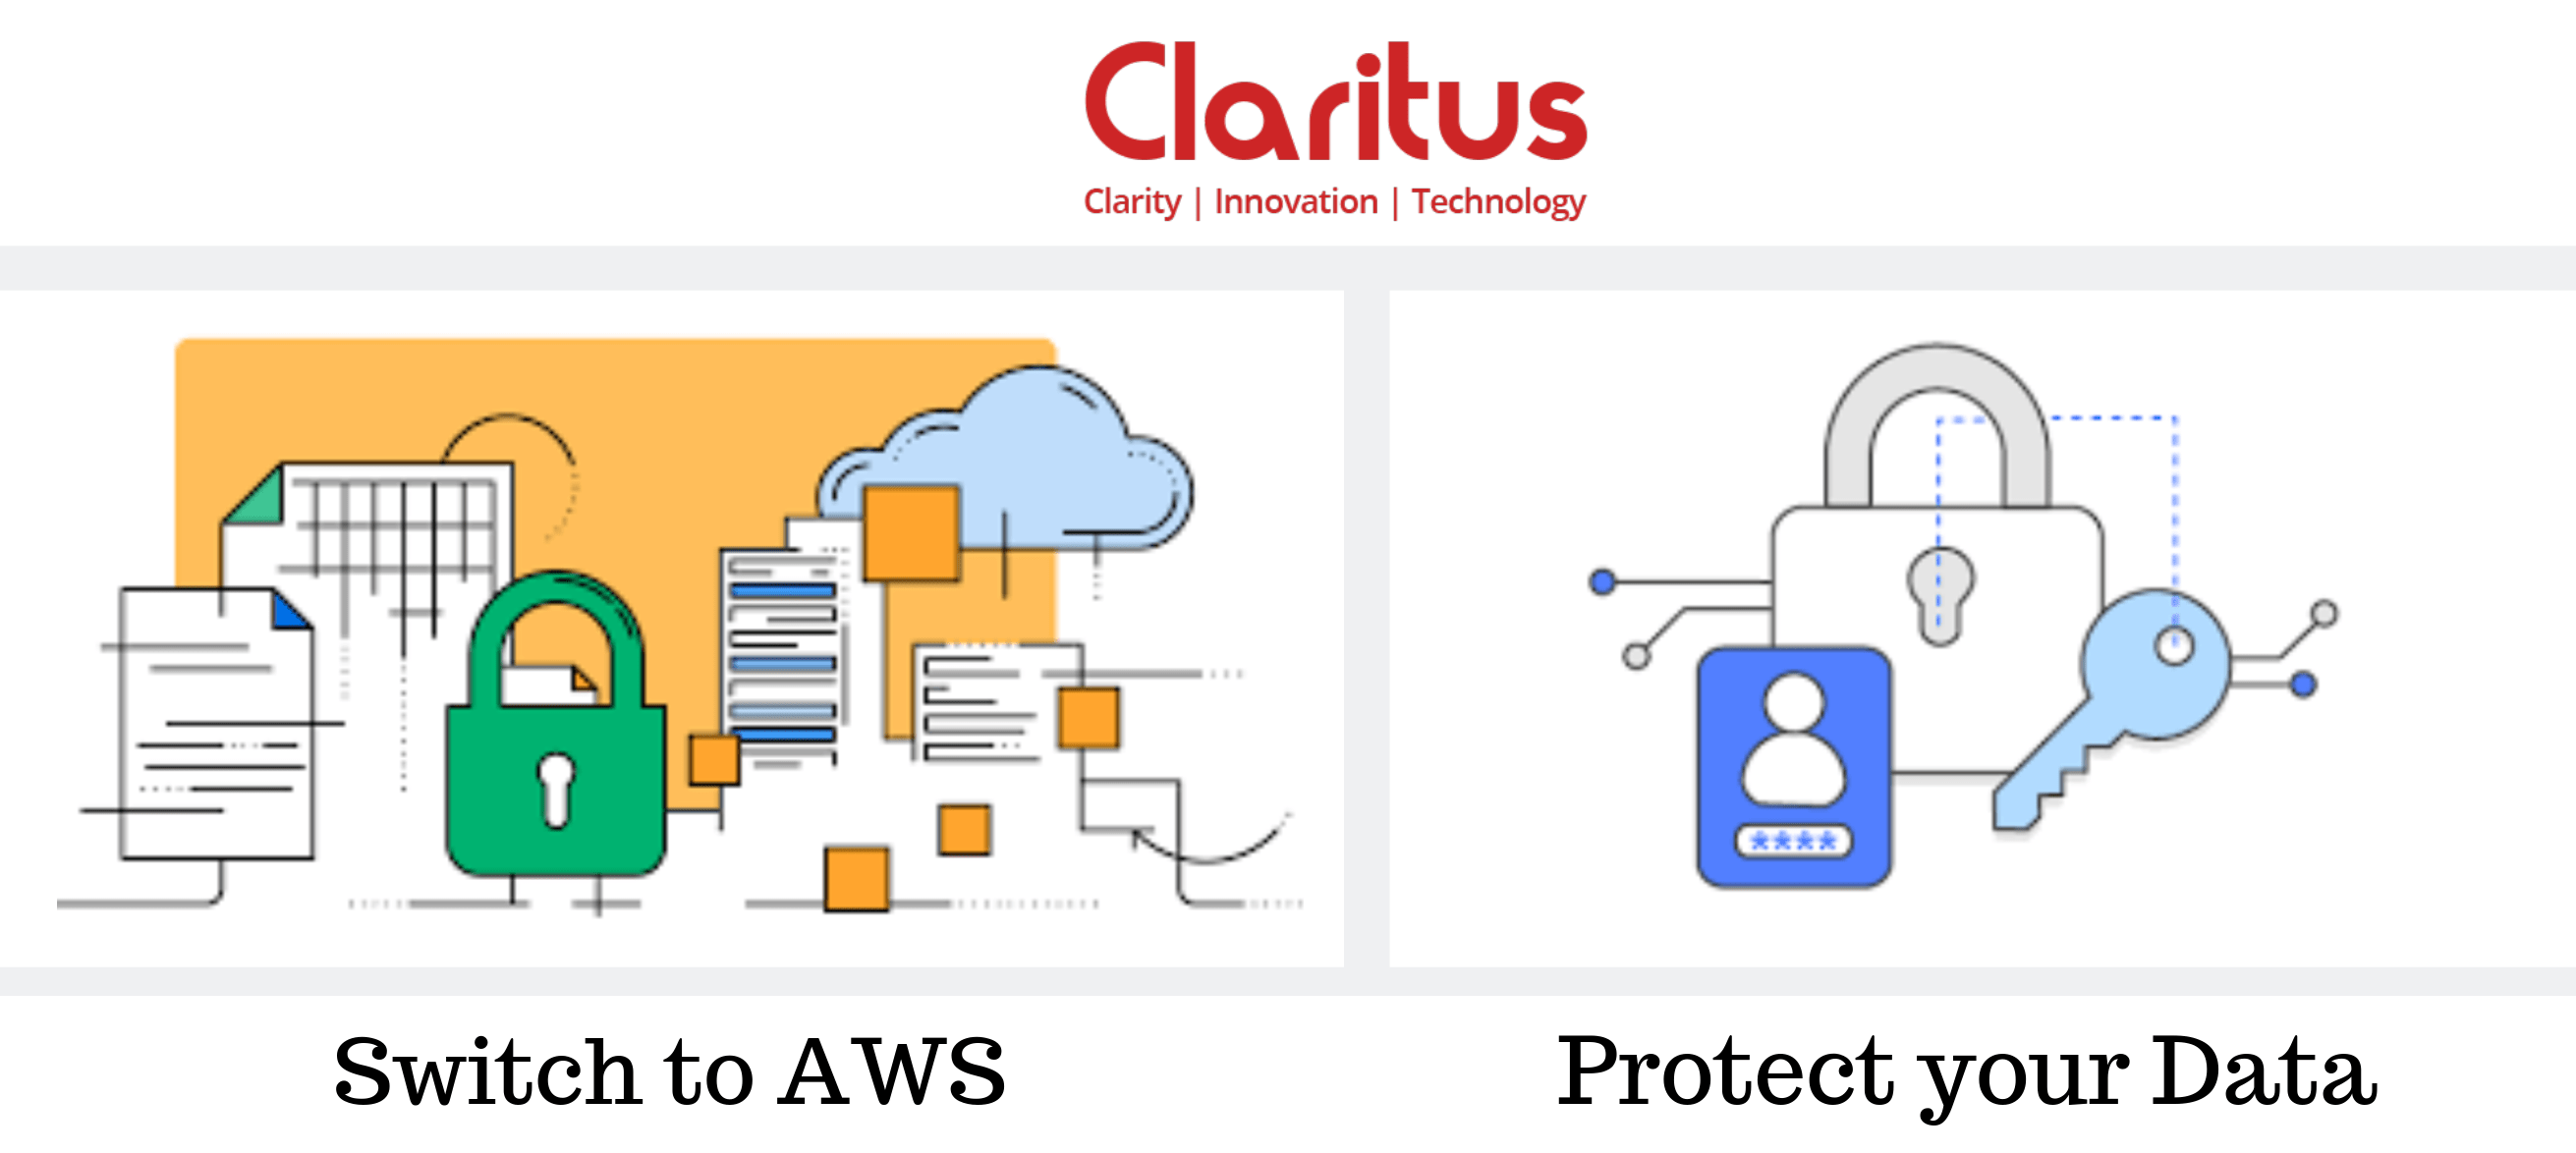 Secure Data using Amazon Web Services